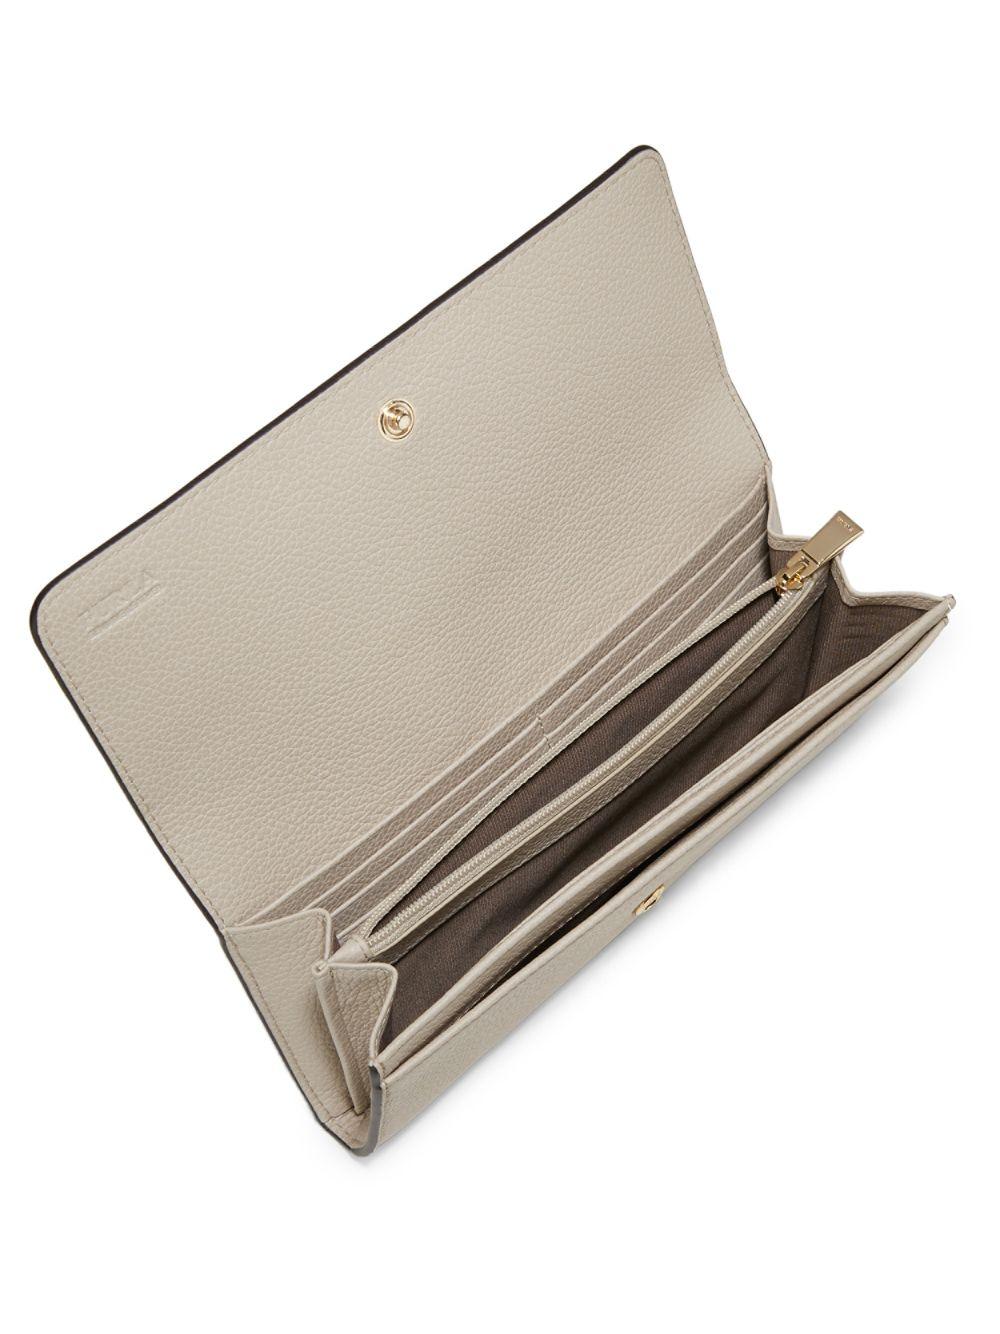 Furla Ritzy Foldover Pebbled Leather Long Wallet in Natural | Lyst